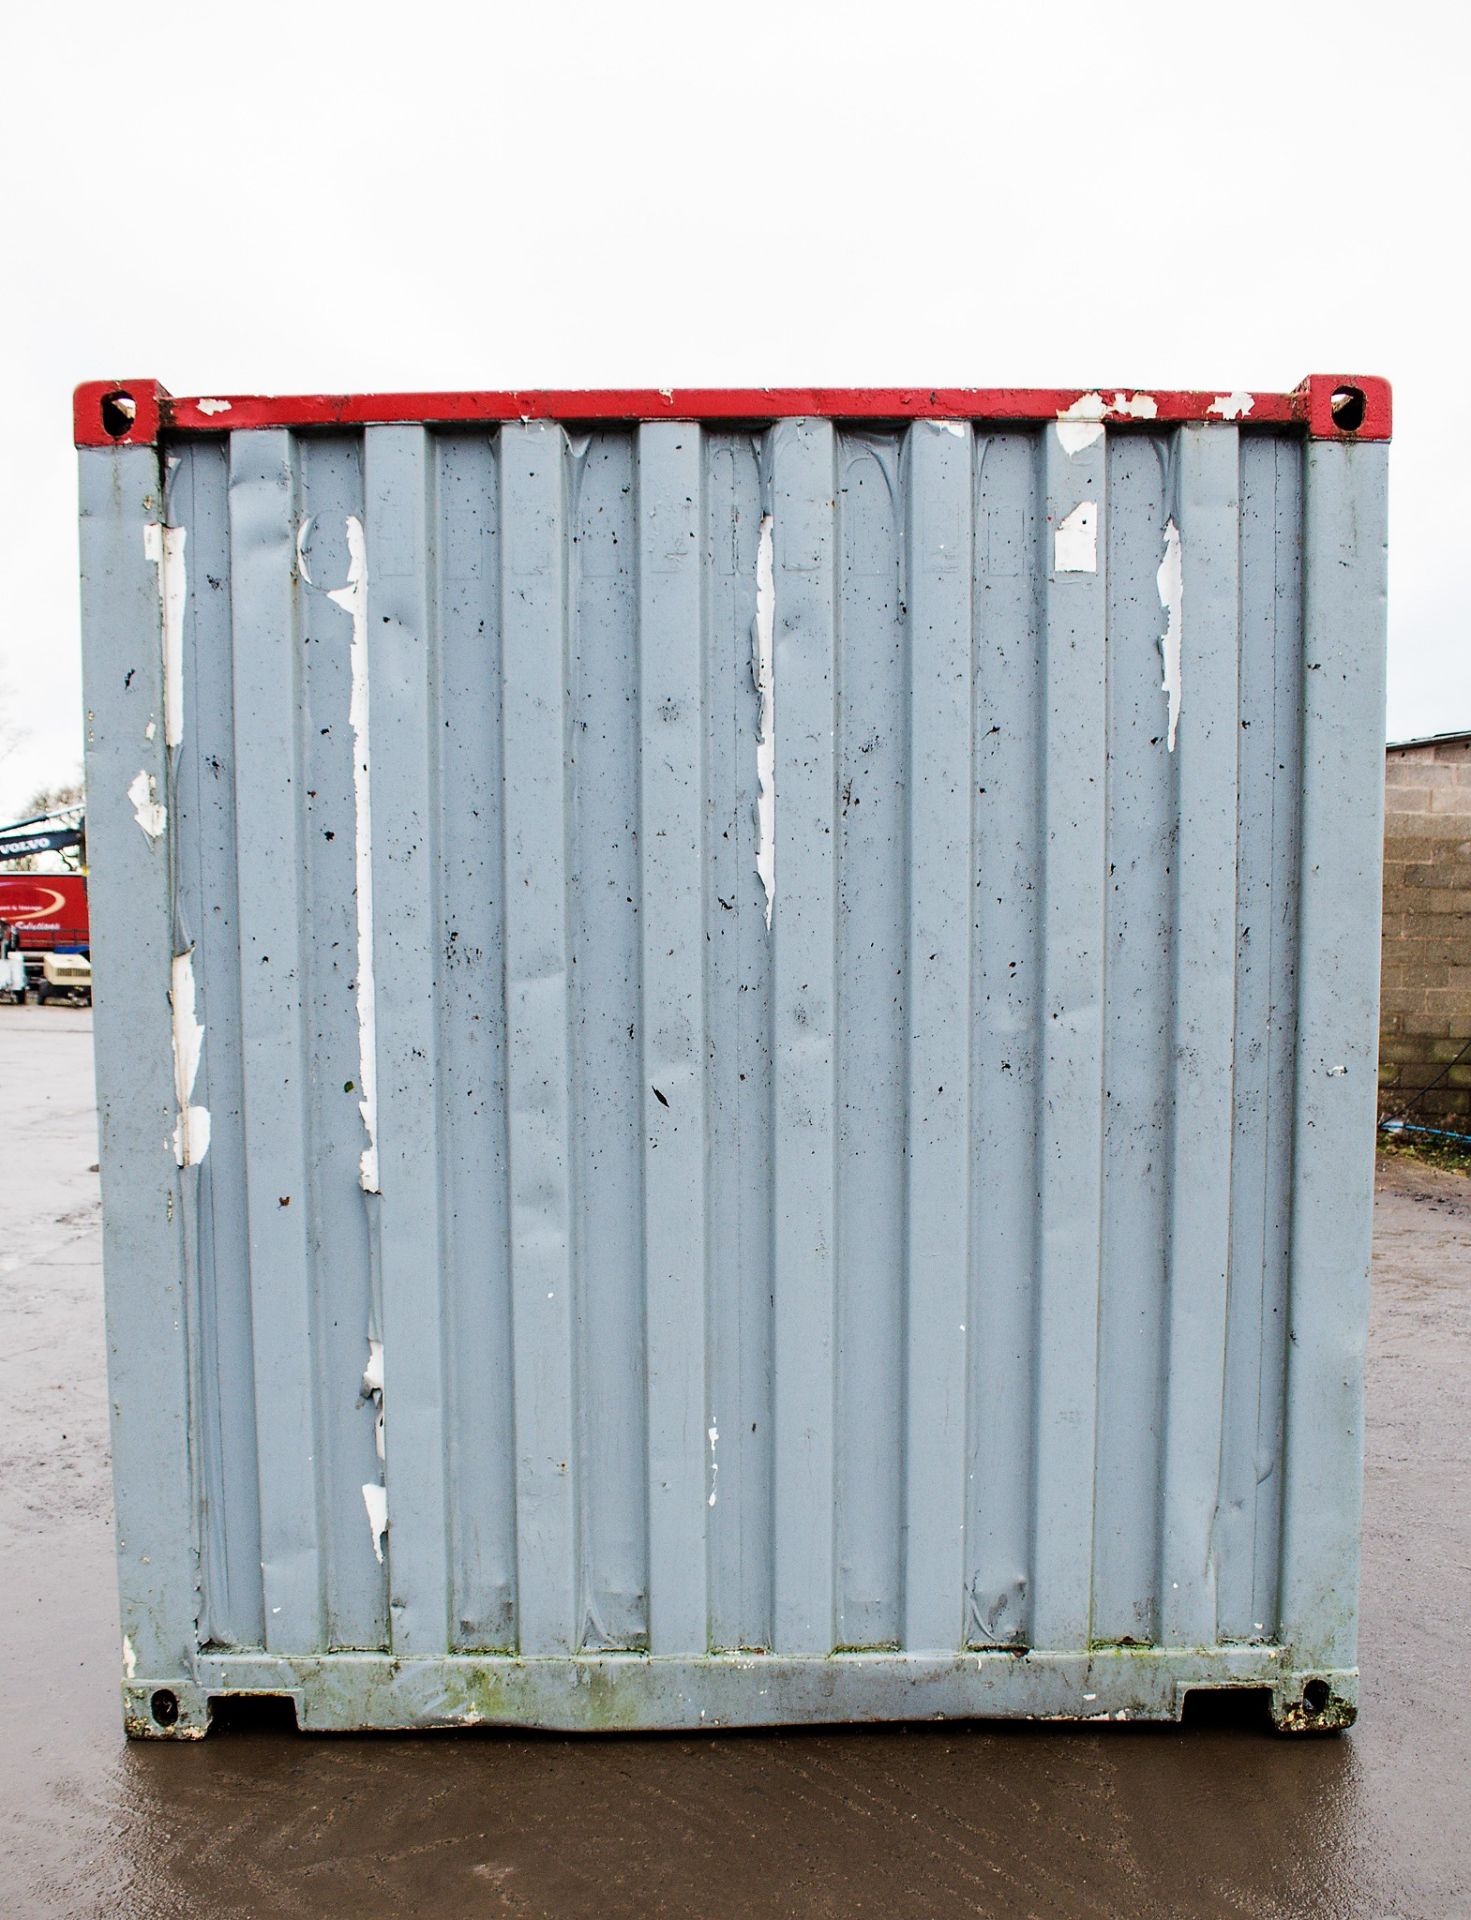 20 ft x 8 ft steel shipping container c/w keys - Image 6 of 7